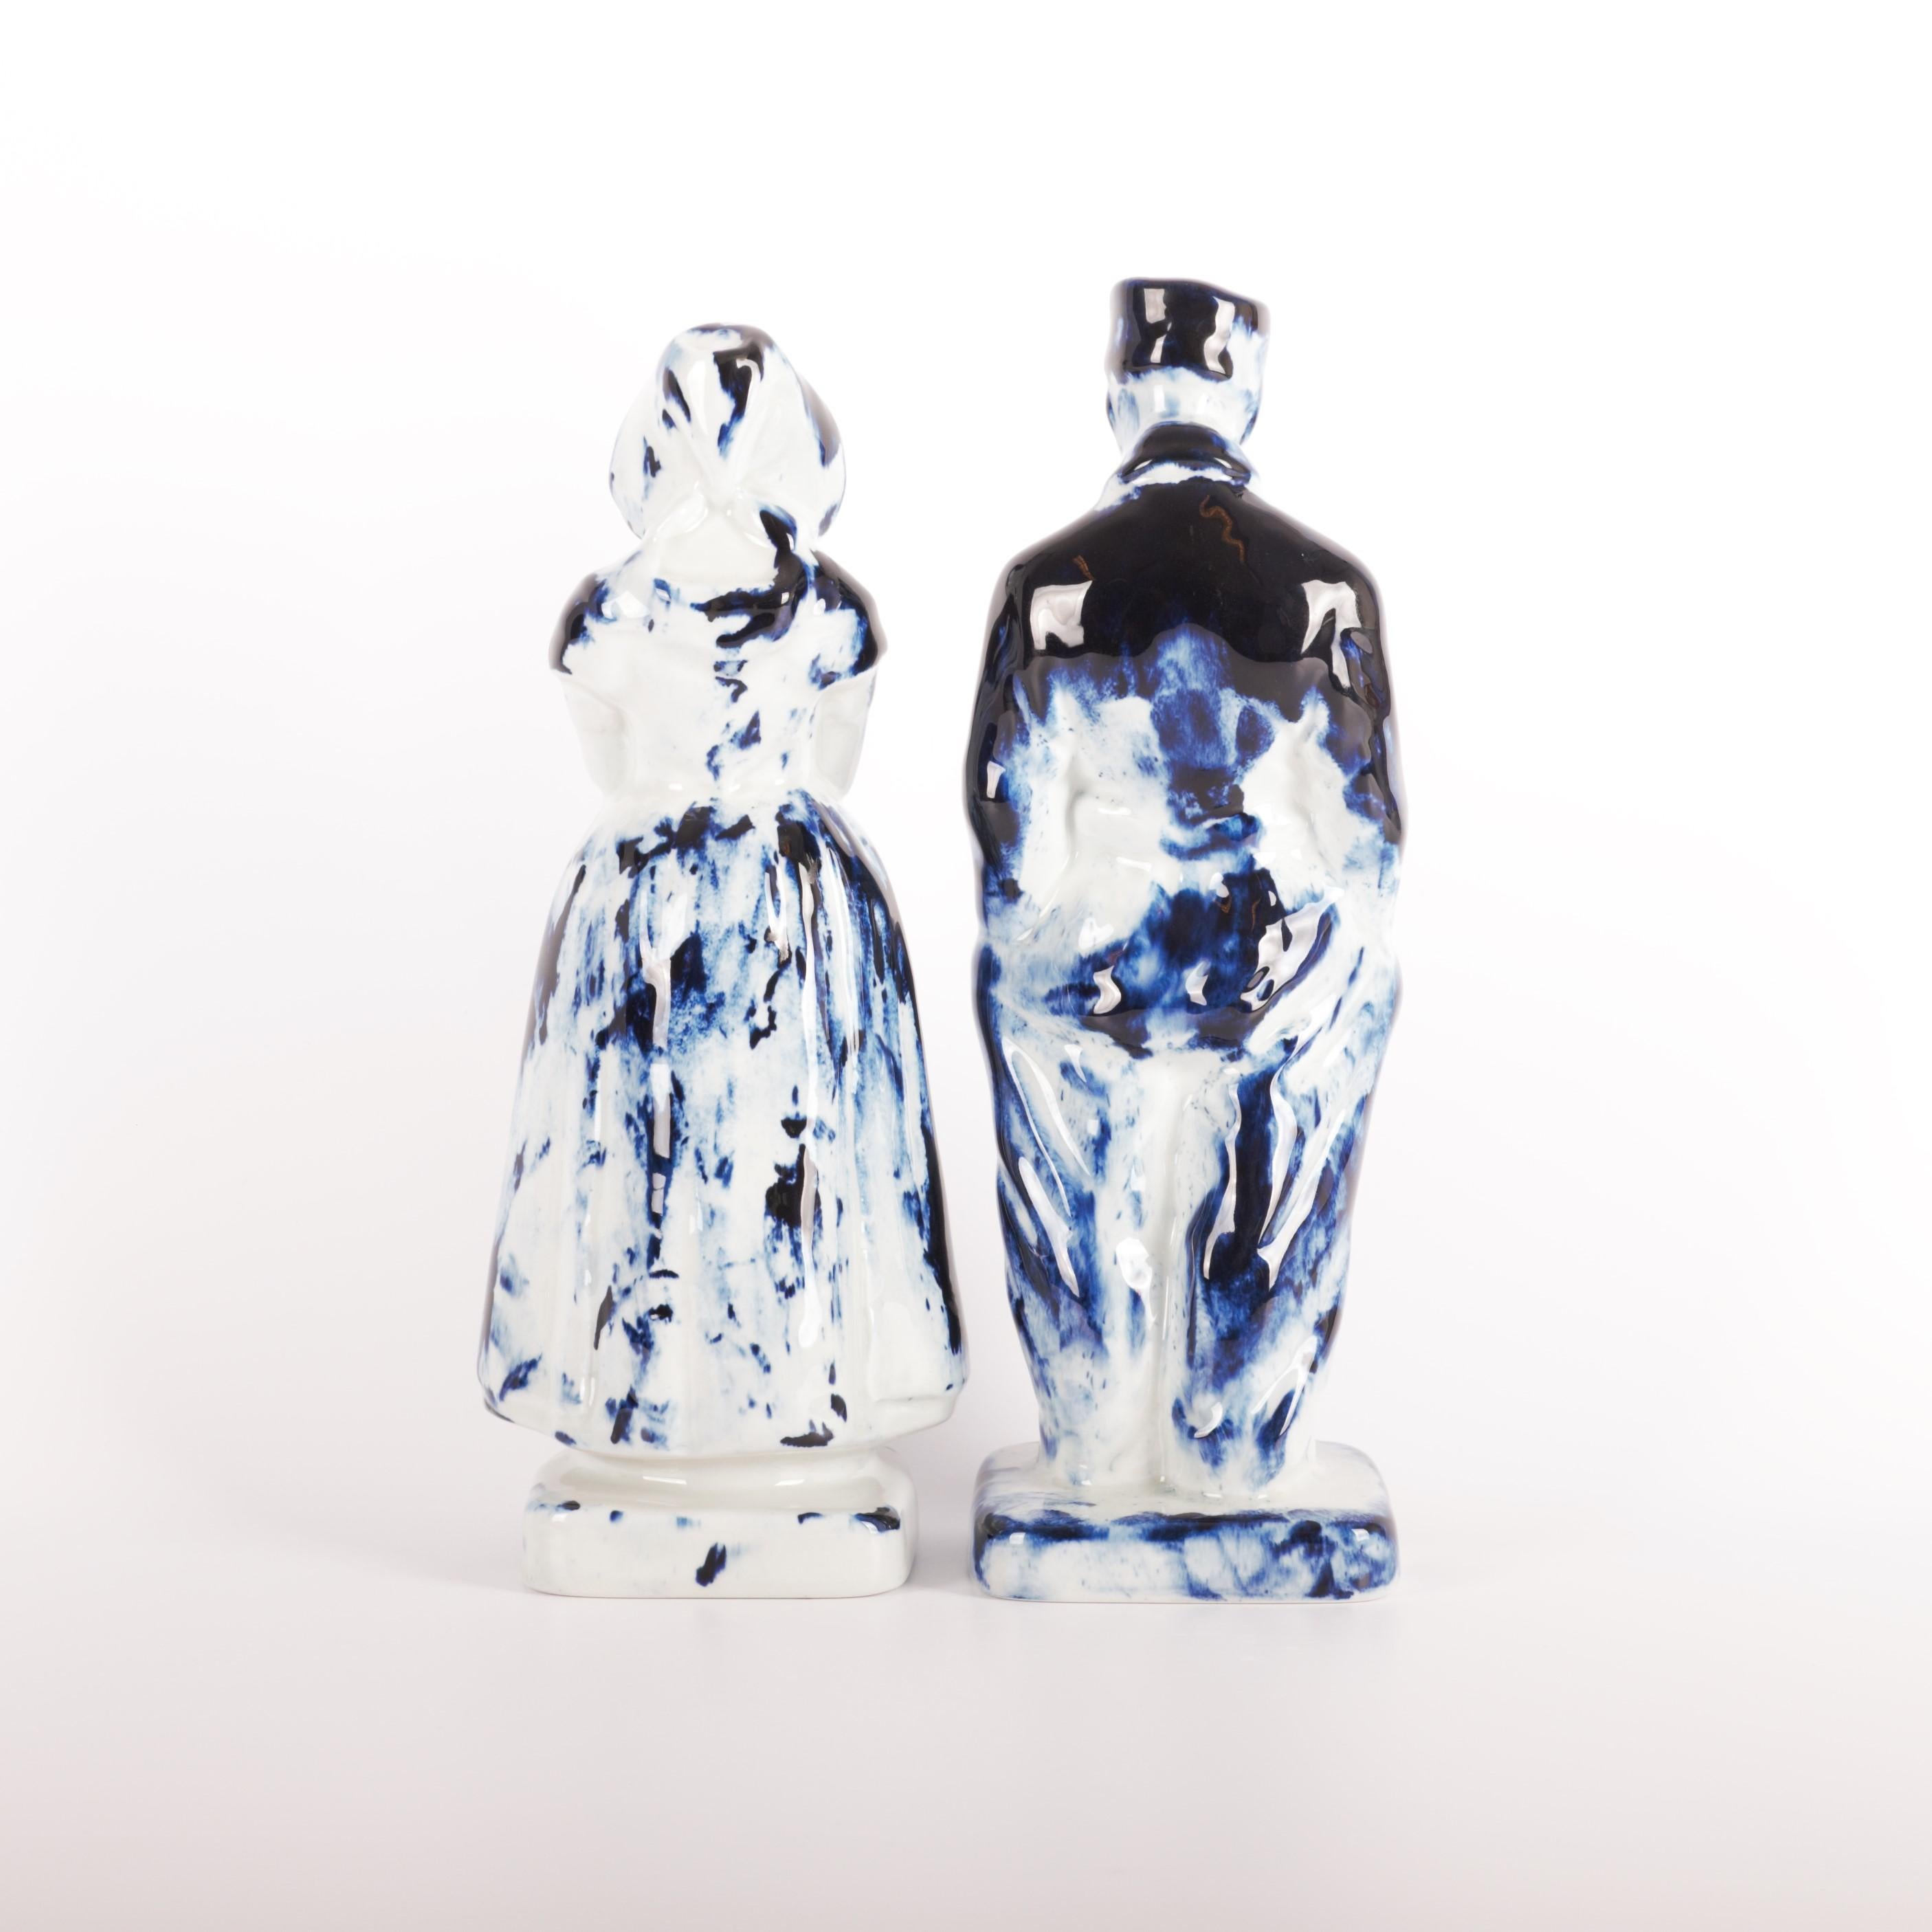 Glazed Delft Blue Farmer & Farmer Wife #3, by Marcel Wanders, Hand Painted, 2006 Unique For Sale